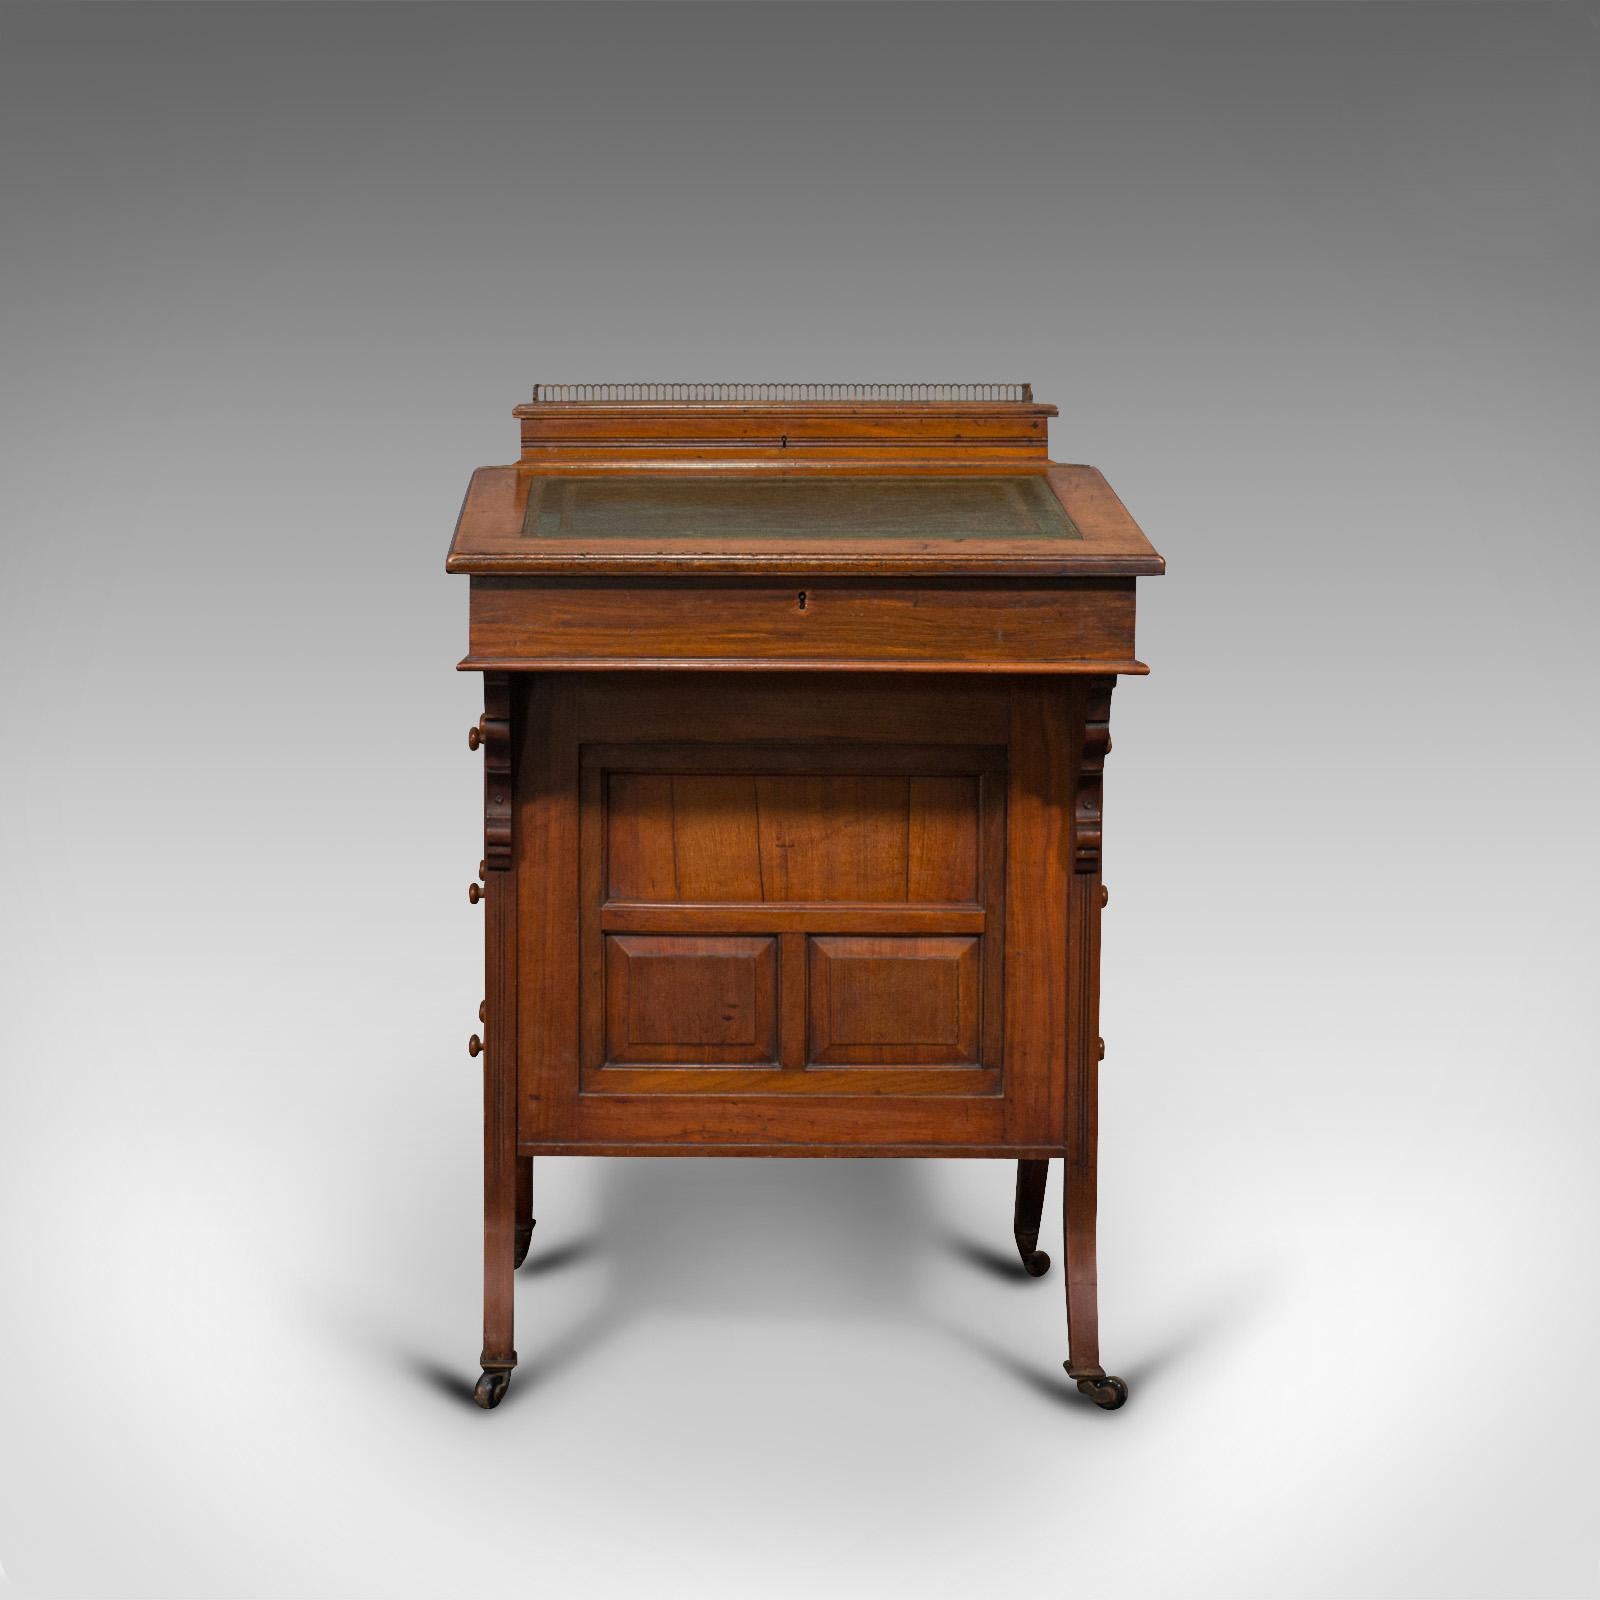 This is an antique Davenport. An English, walnut and bird's-eye maple writing desk, dating to the Victorian period, circa 1880.

Dashing Victorian Davenport with quality figuring
Displays a desirable aged patina - very good order